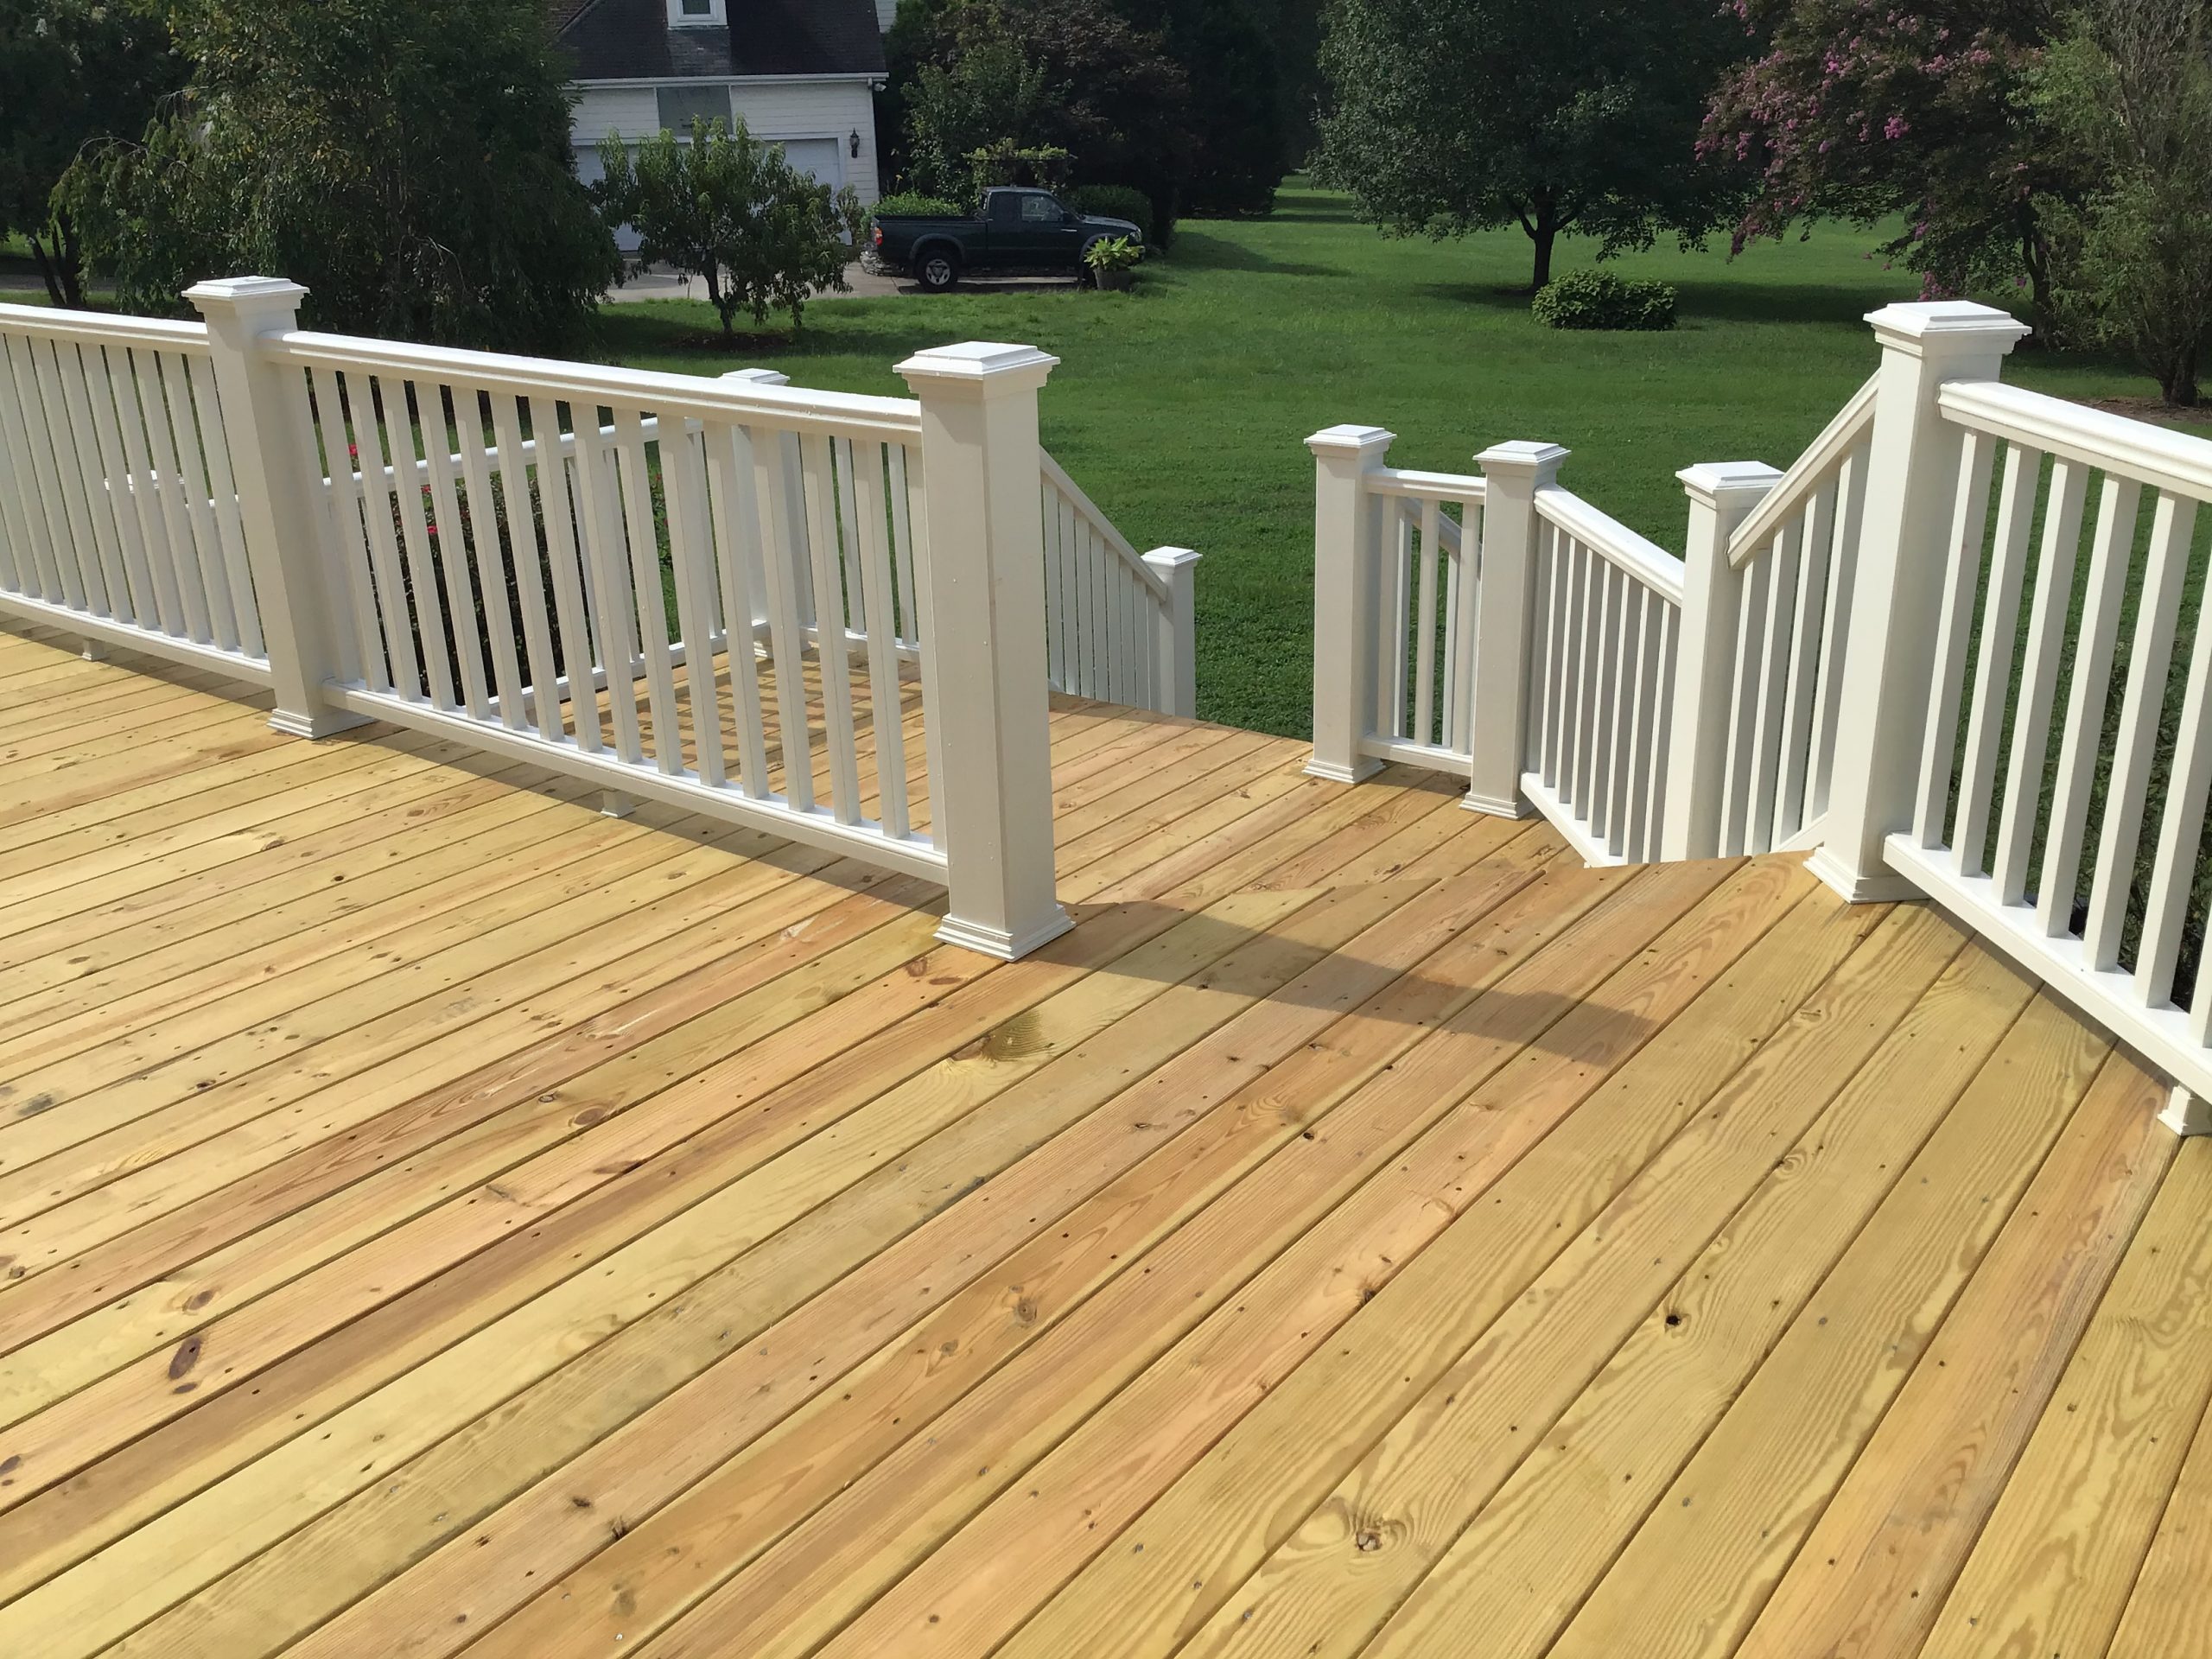 Trex rails and new treated decking